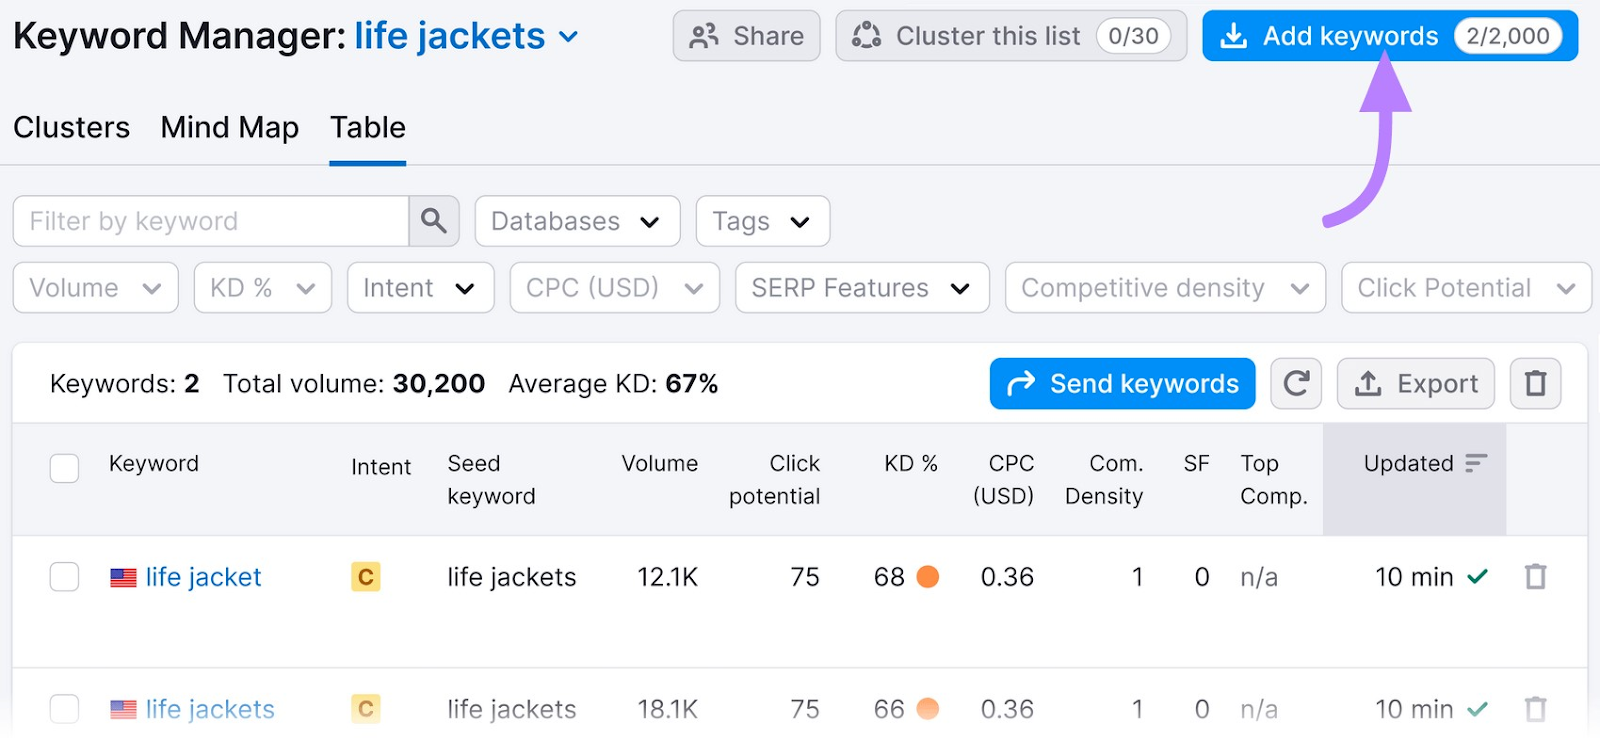 Keyword Manager results for "life jackets"